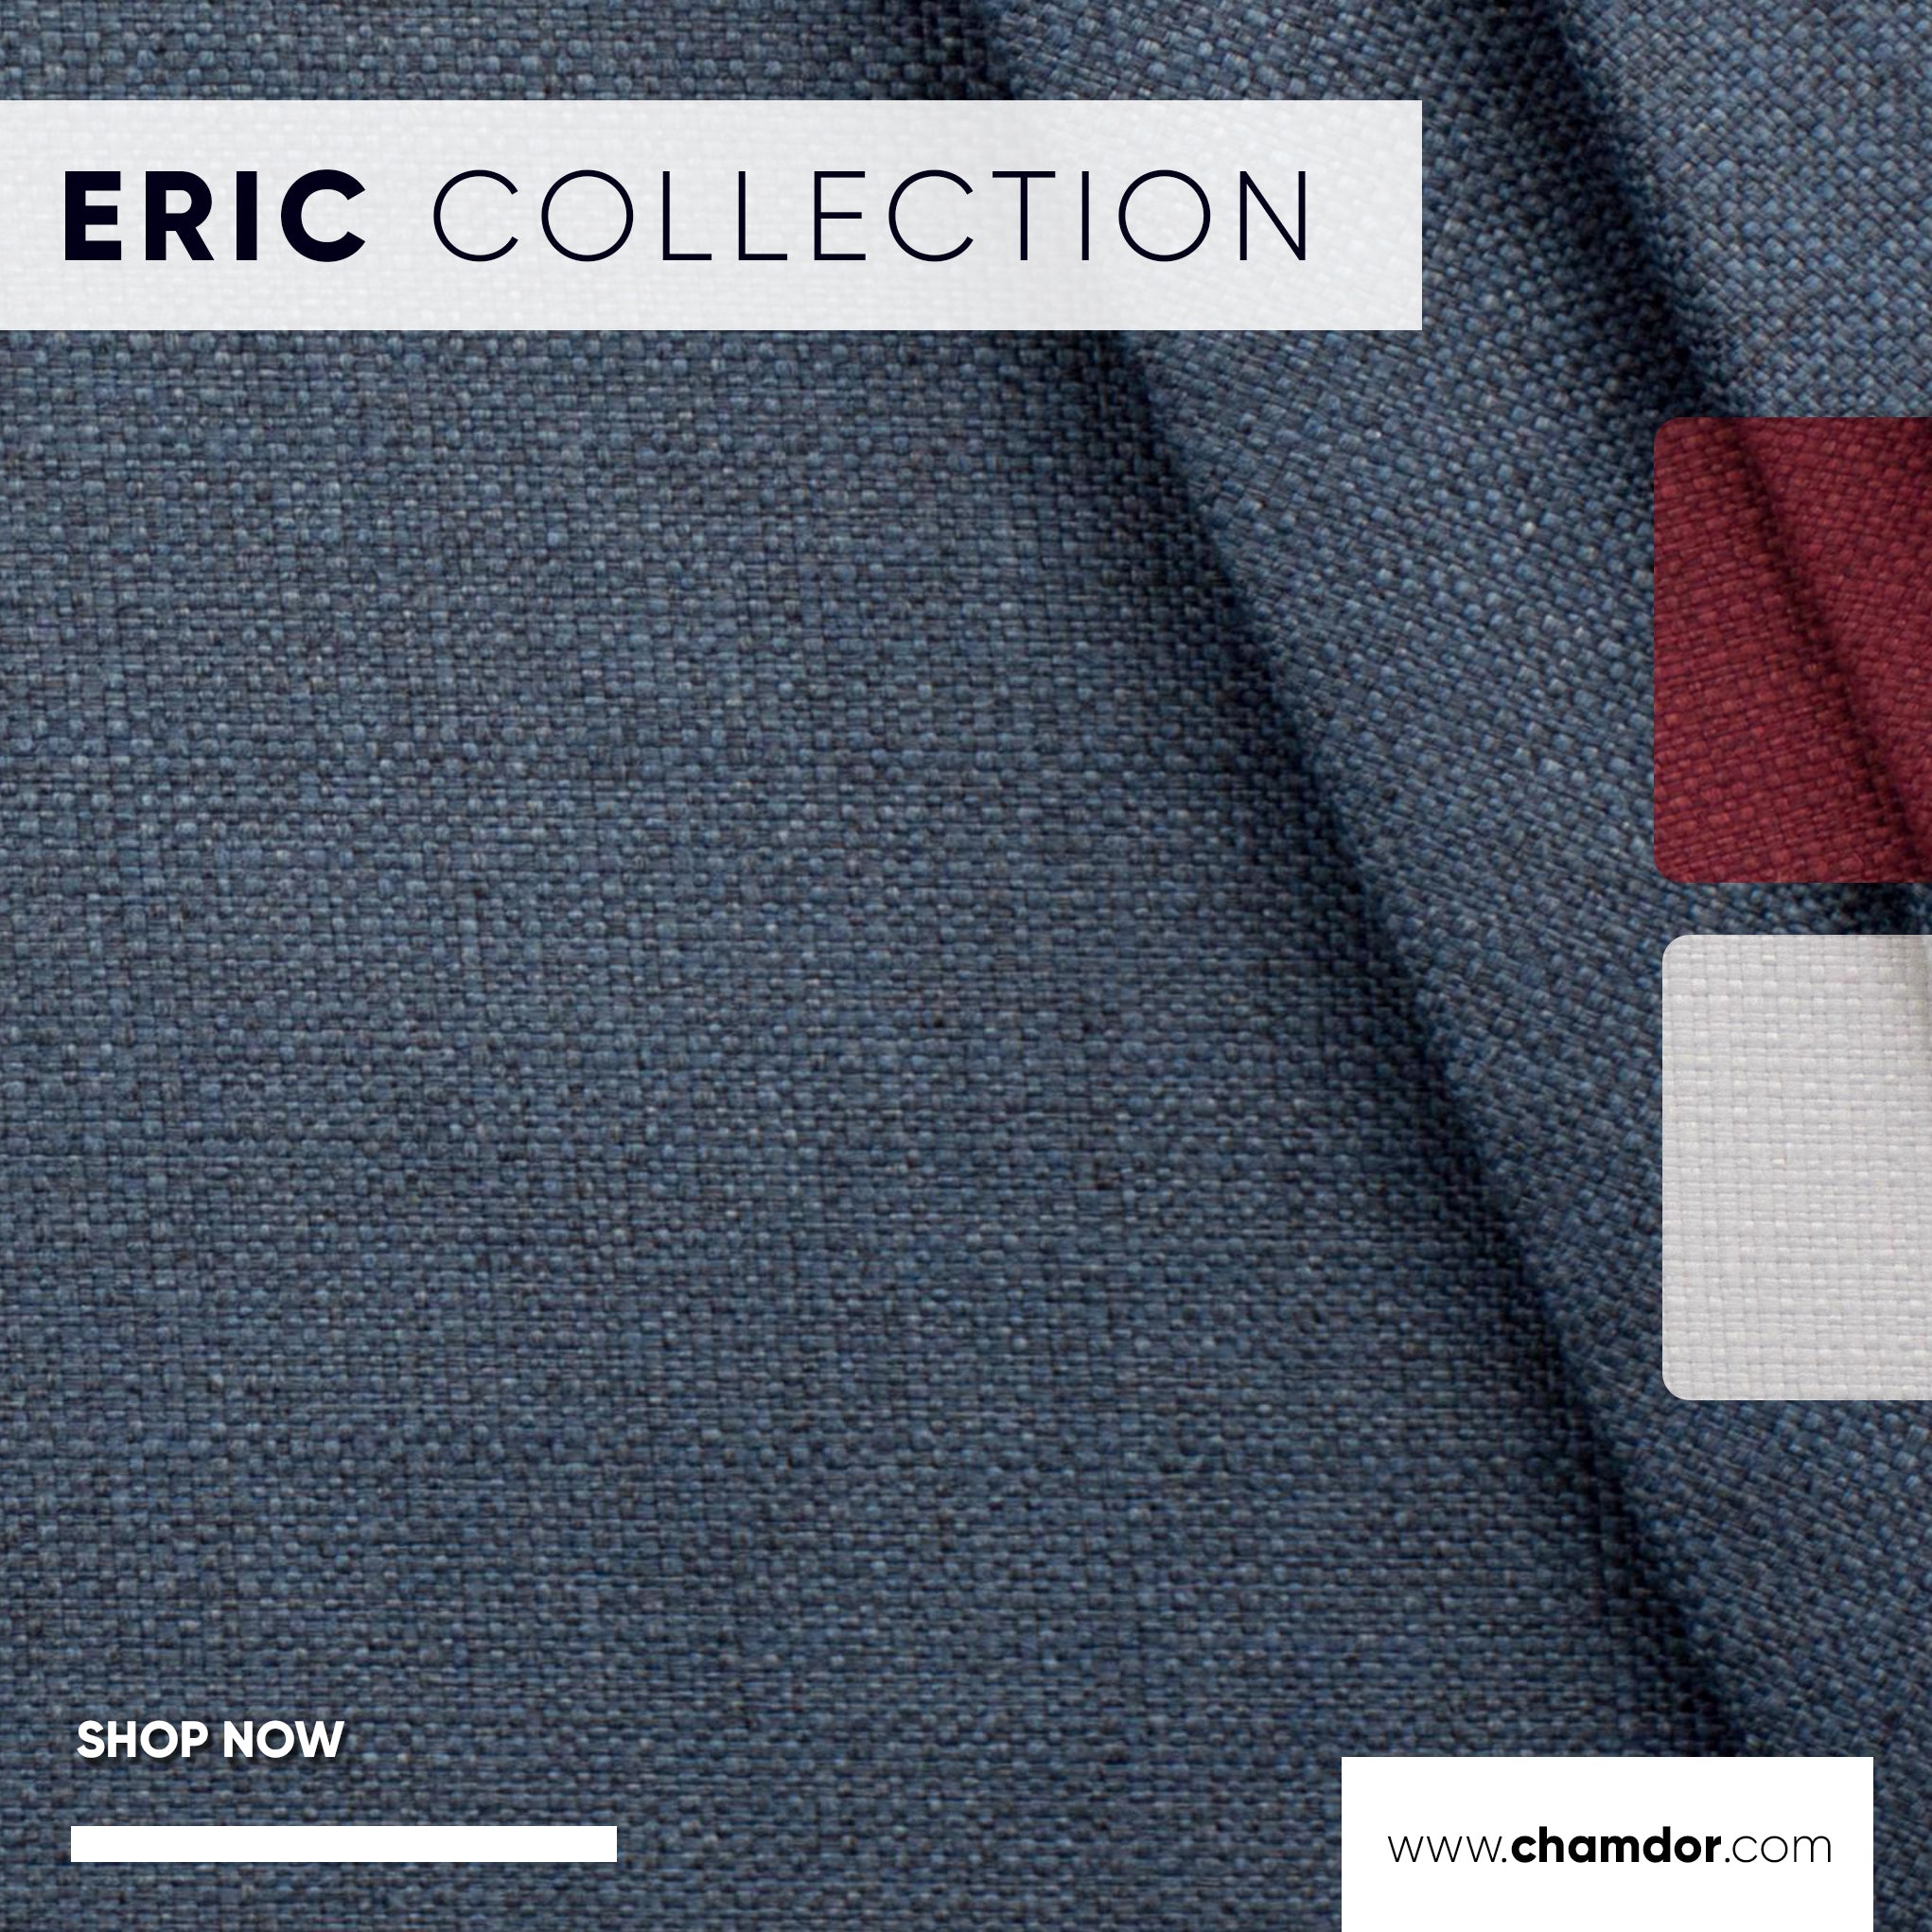 Eric Collection